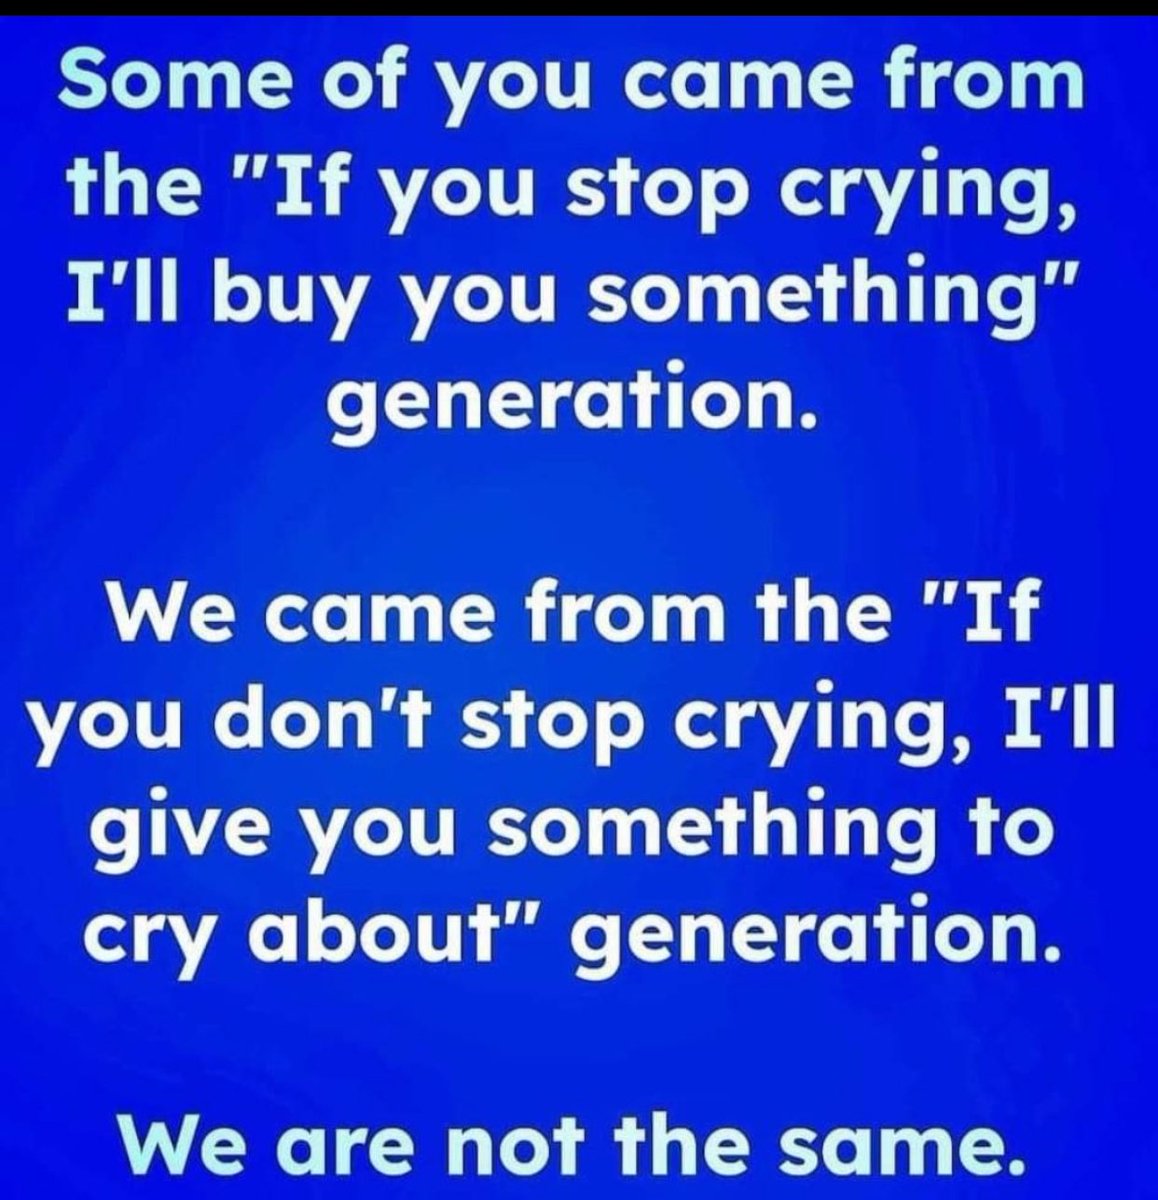 Which generation are you?